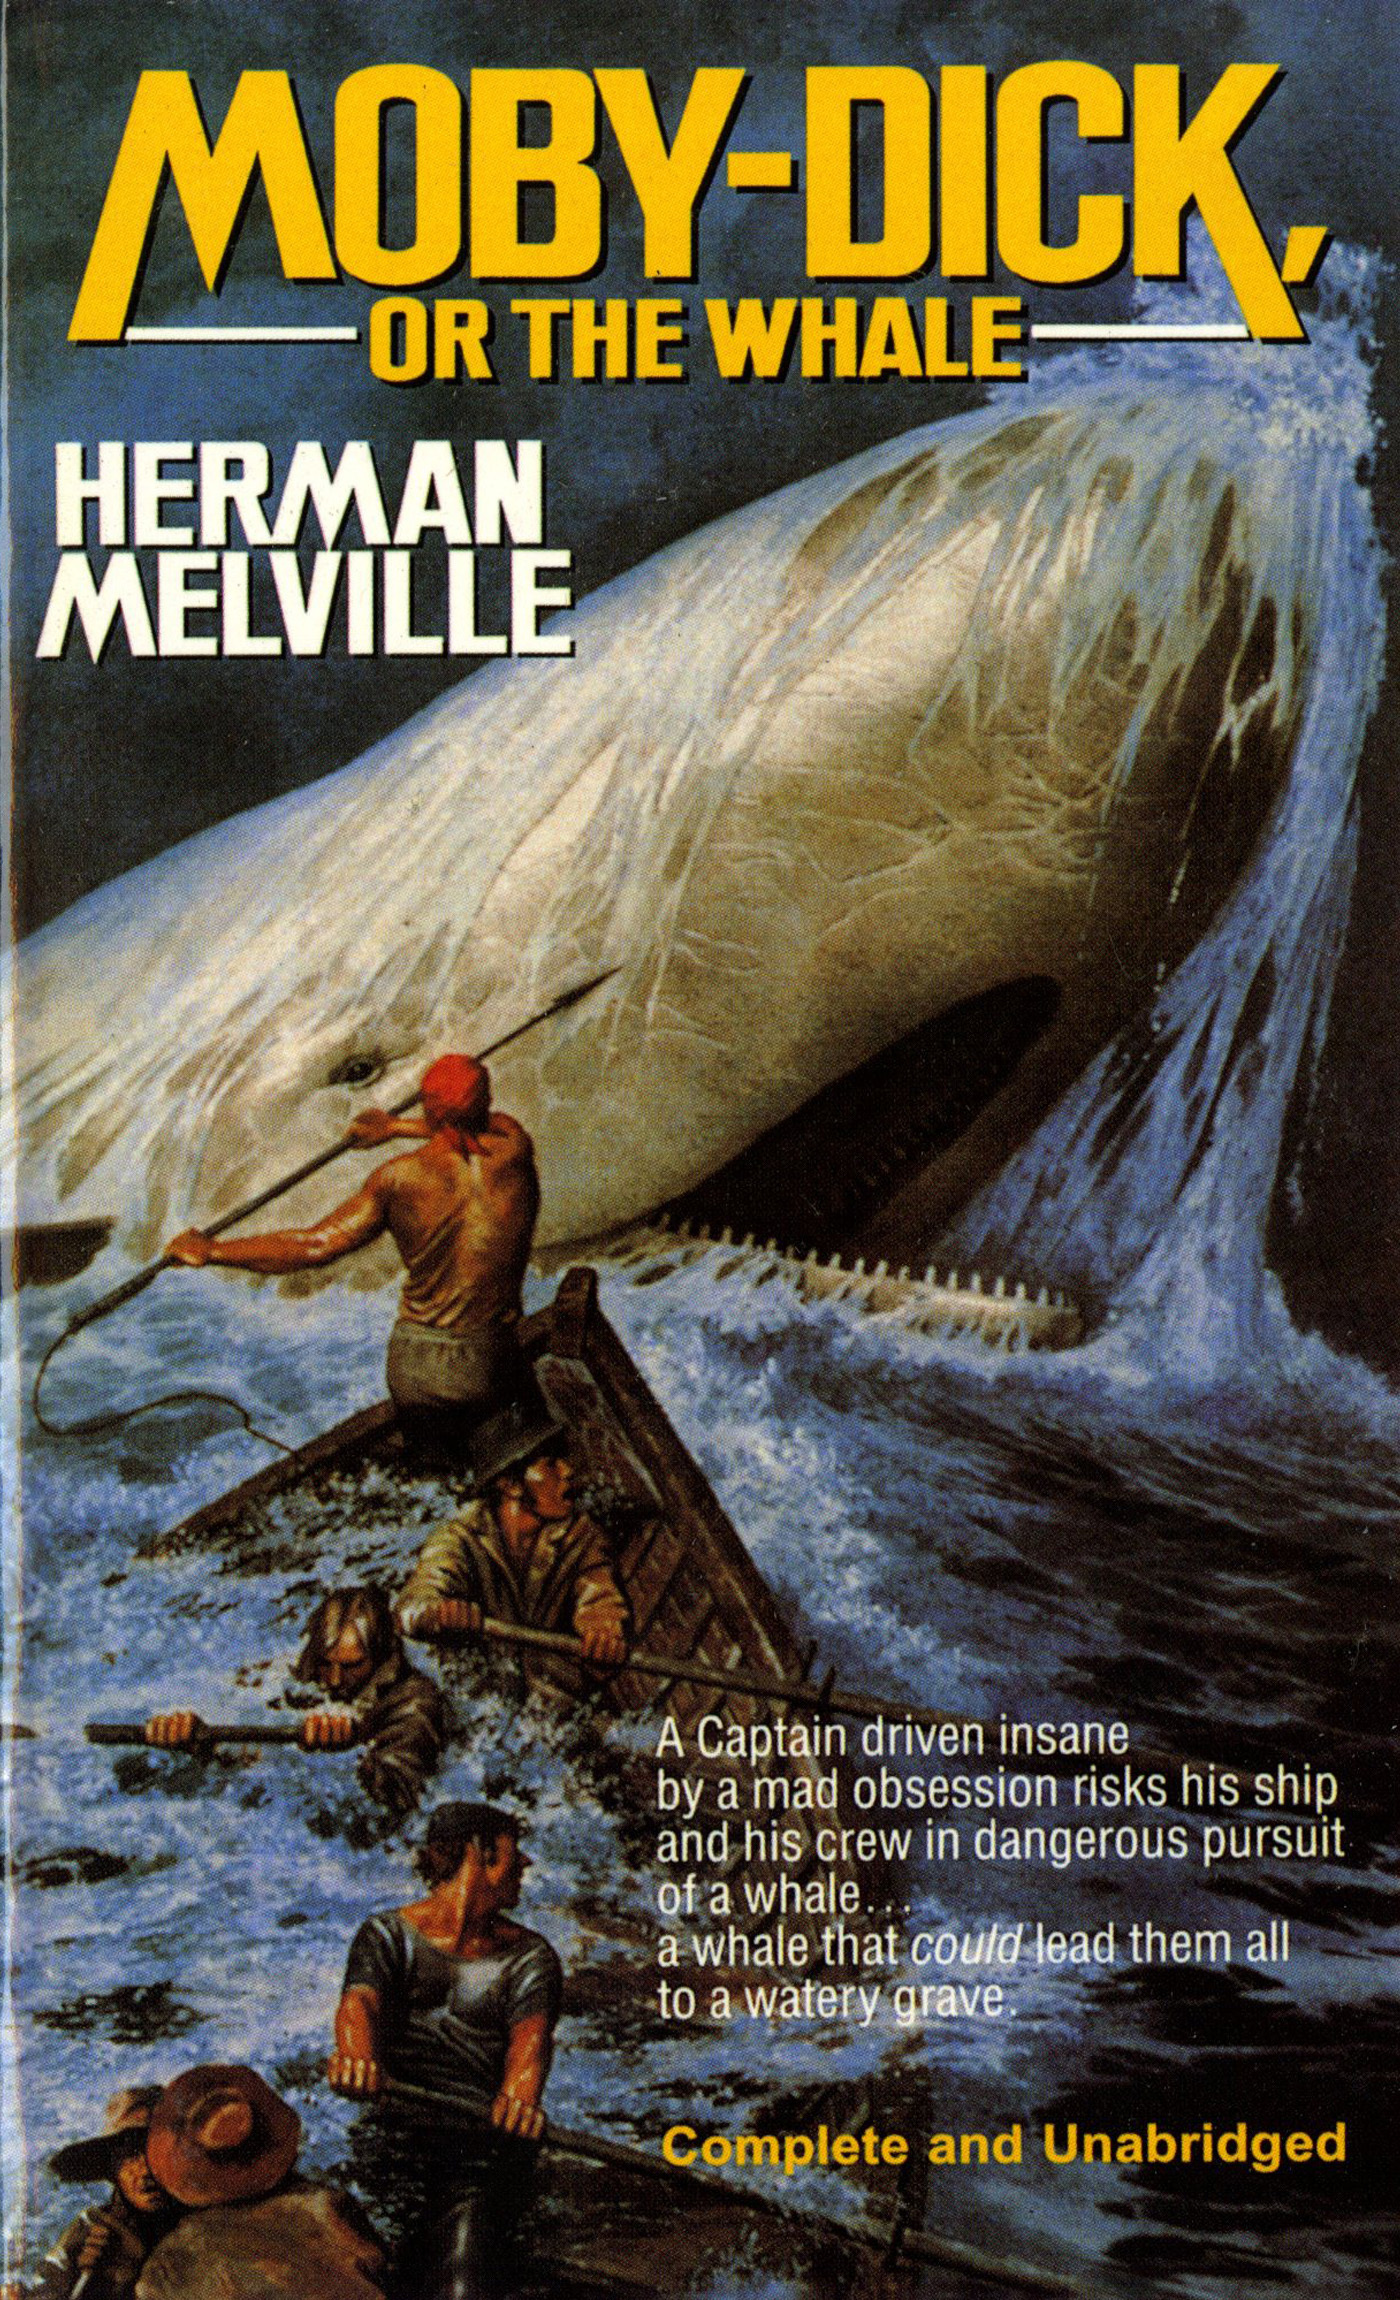 Moby Dick : Or the Whale by Herman Melville